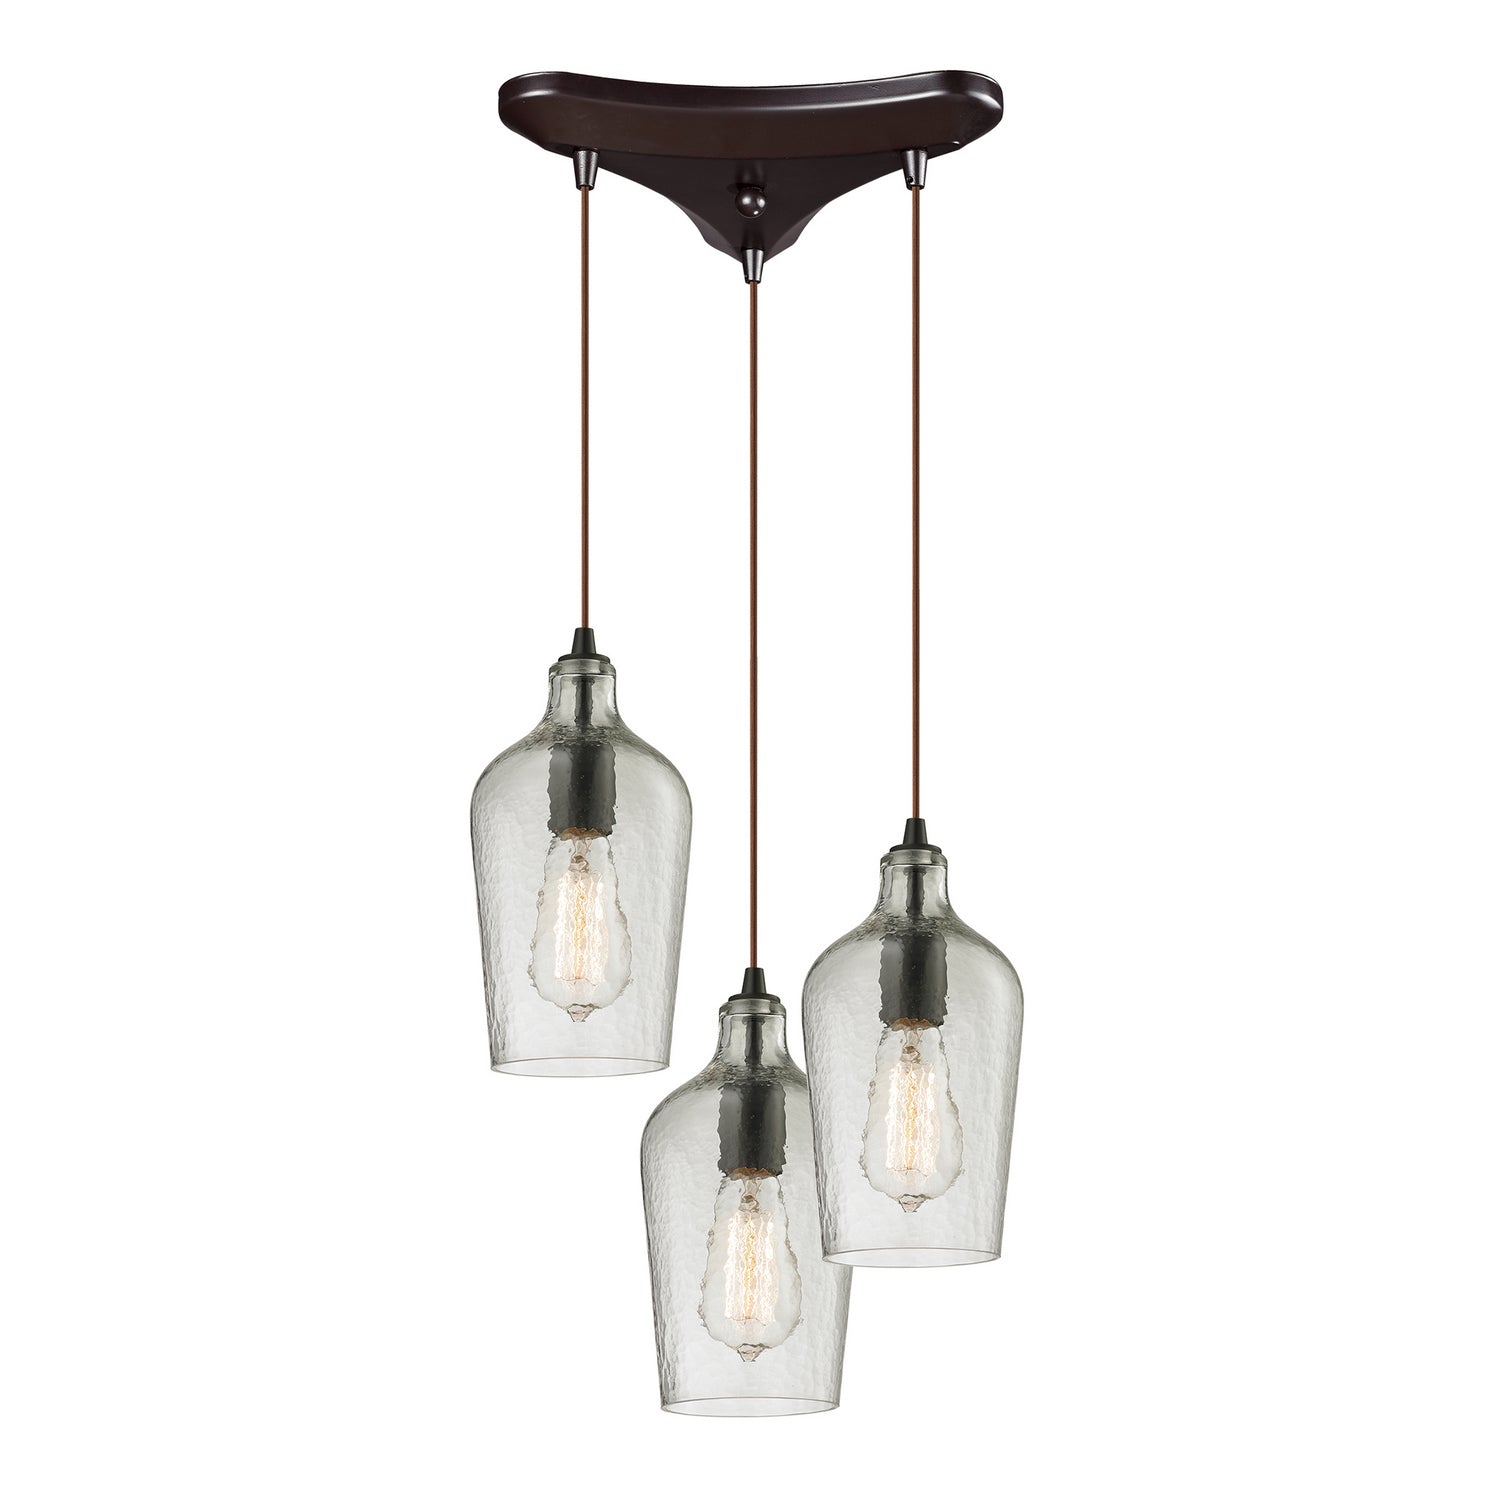 ELK Home - 10331/3CLR - Three Light Pendant - Hammered Glass - Oil Rubbed Bronze